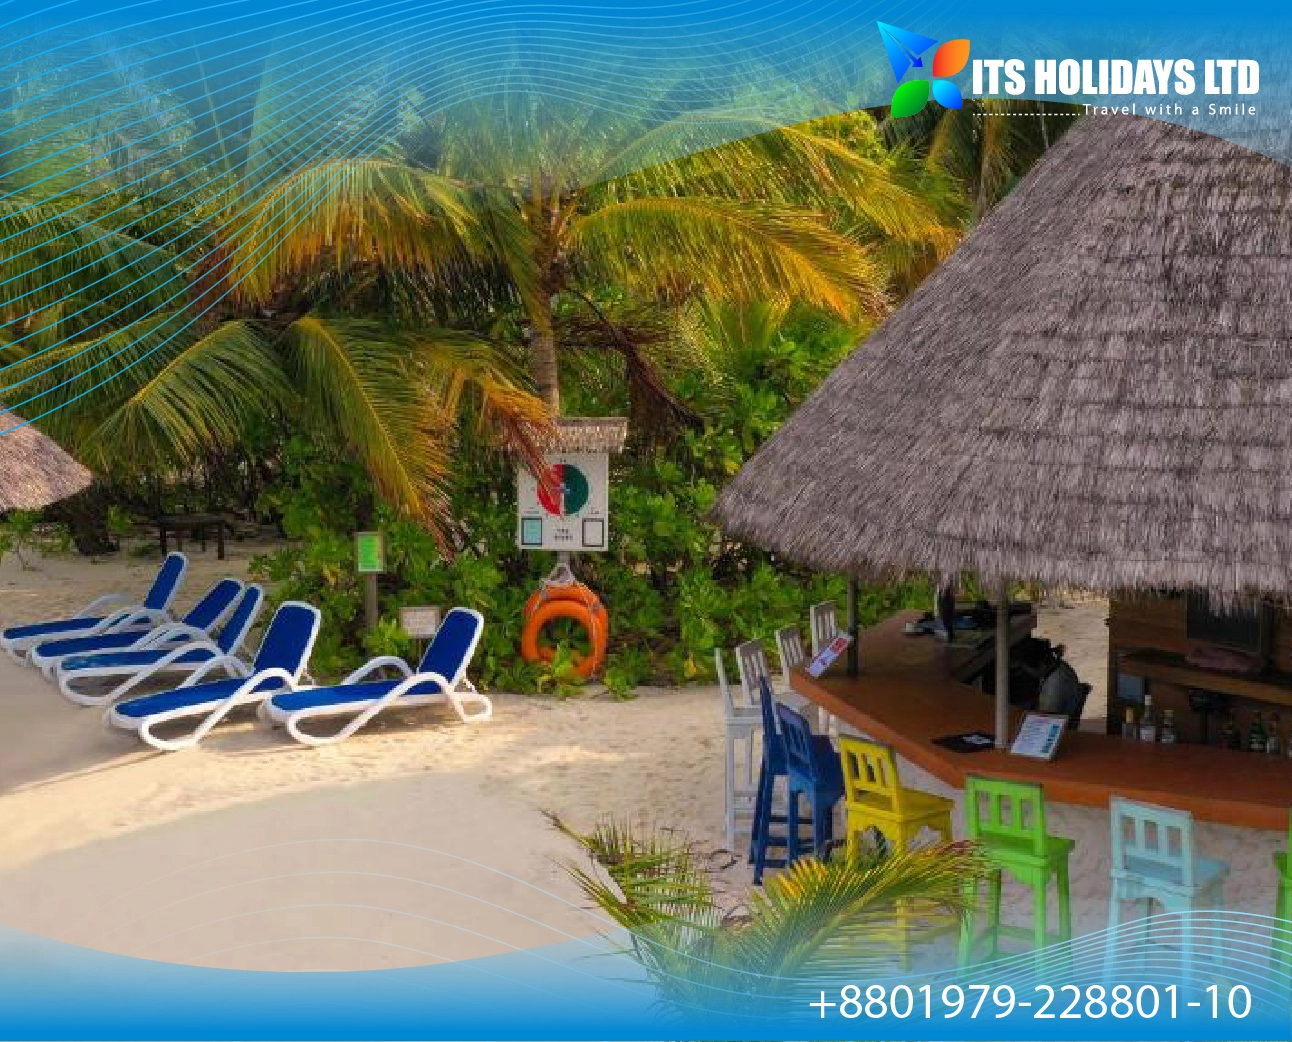 Eid Exclusive Package Tour at Maafushi Island In Maldives - 3